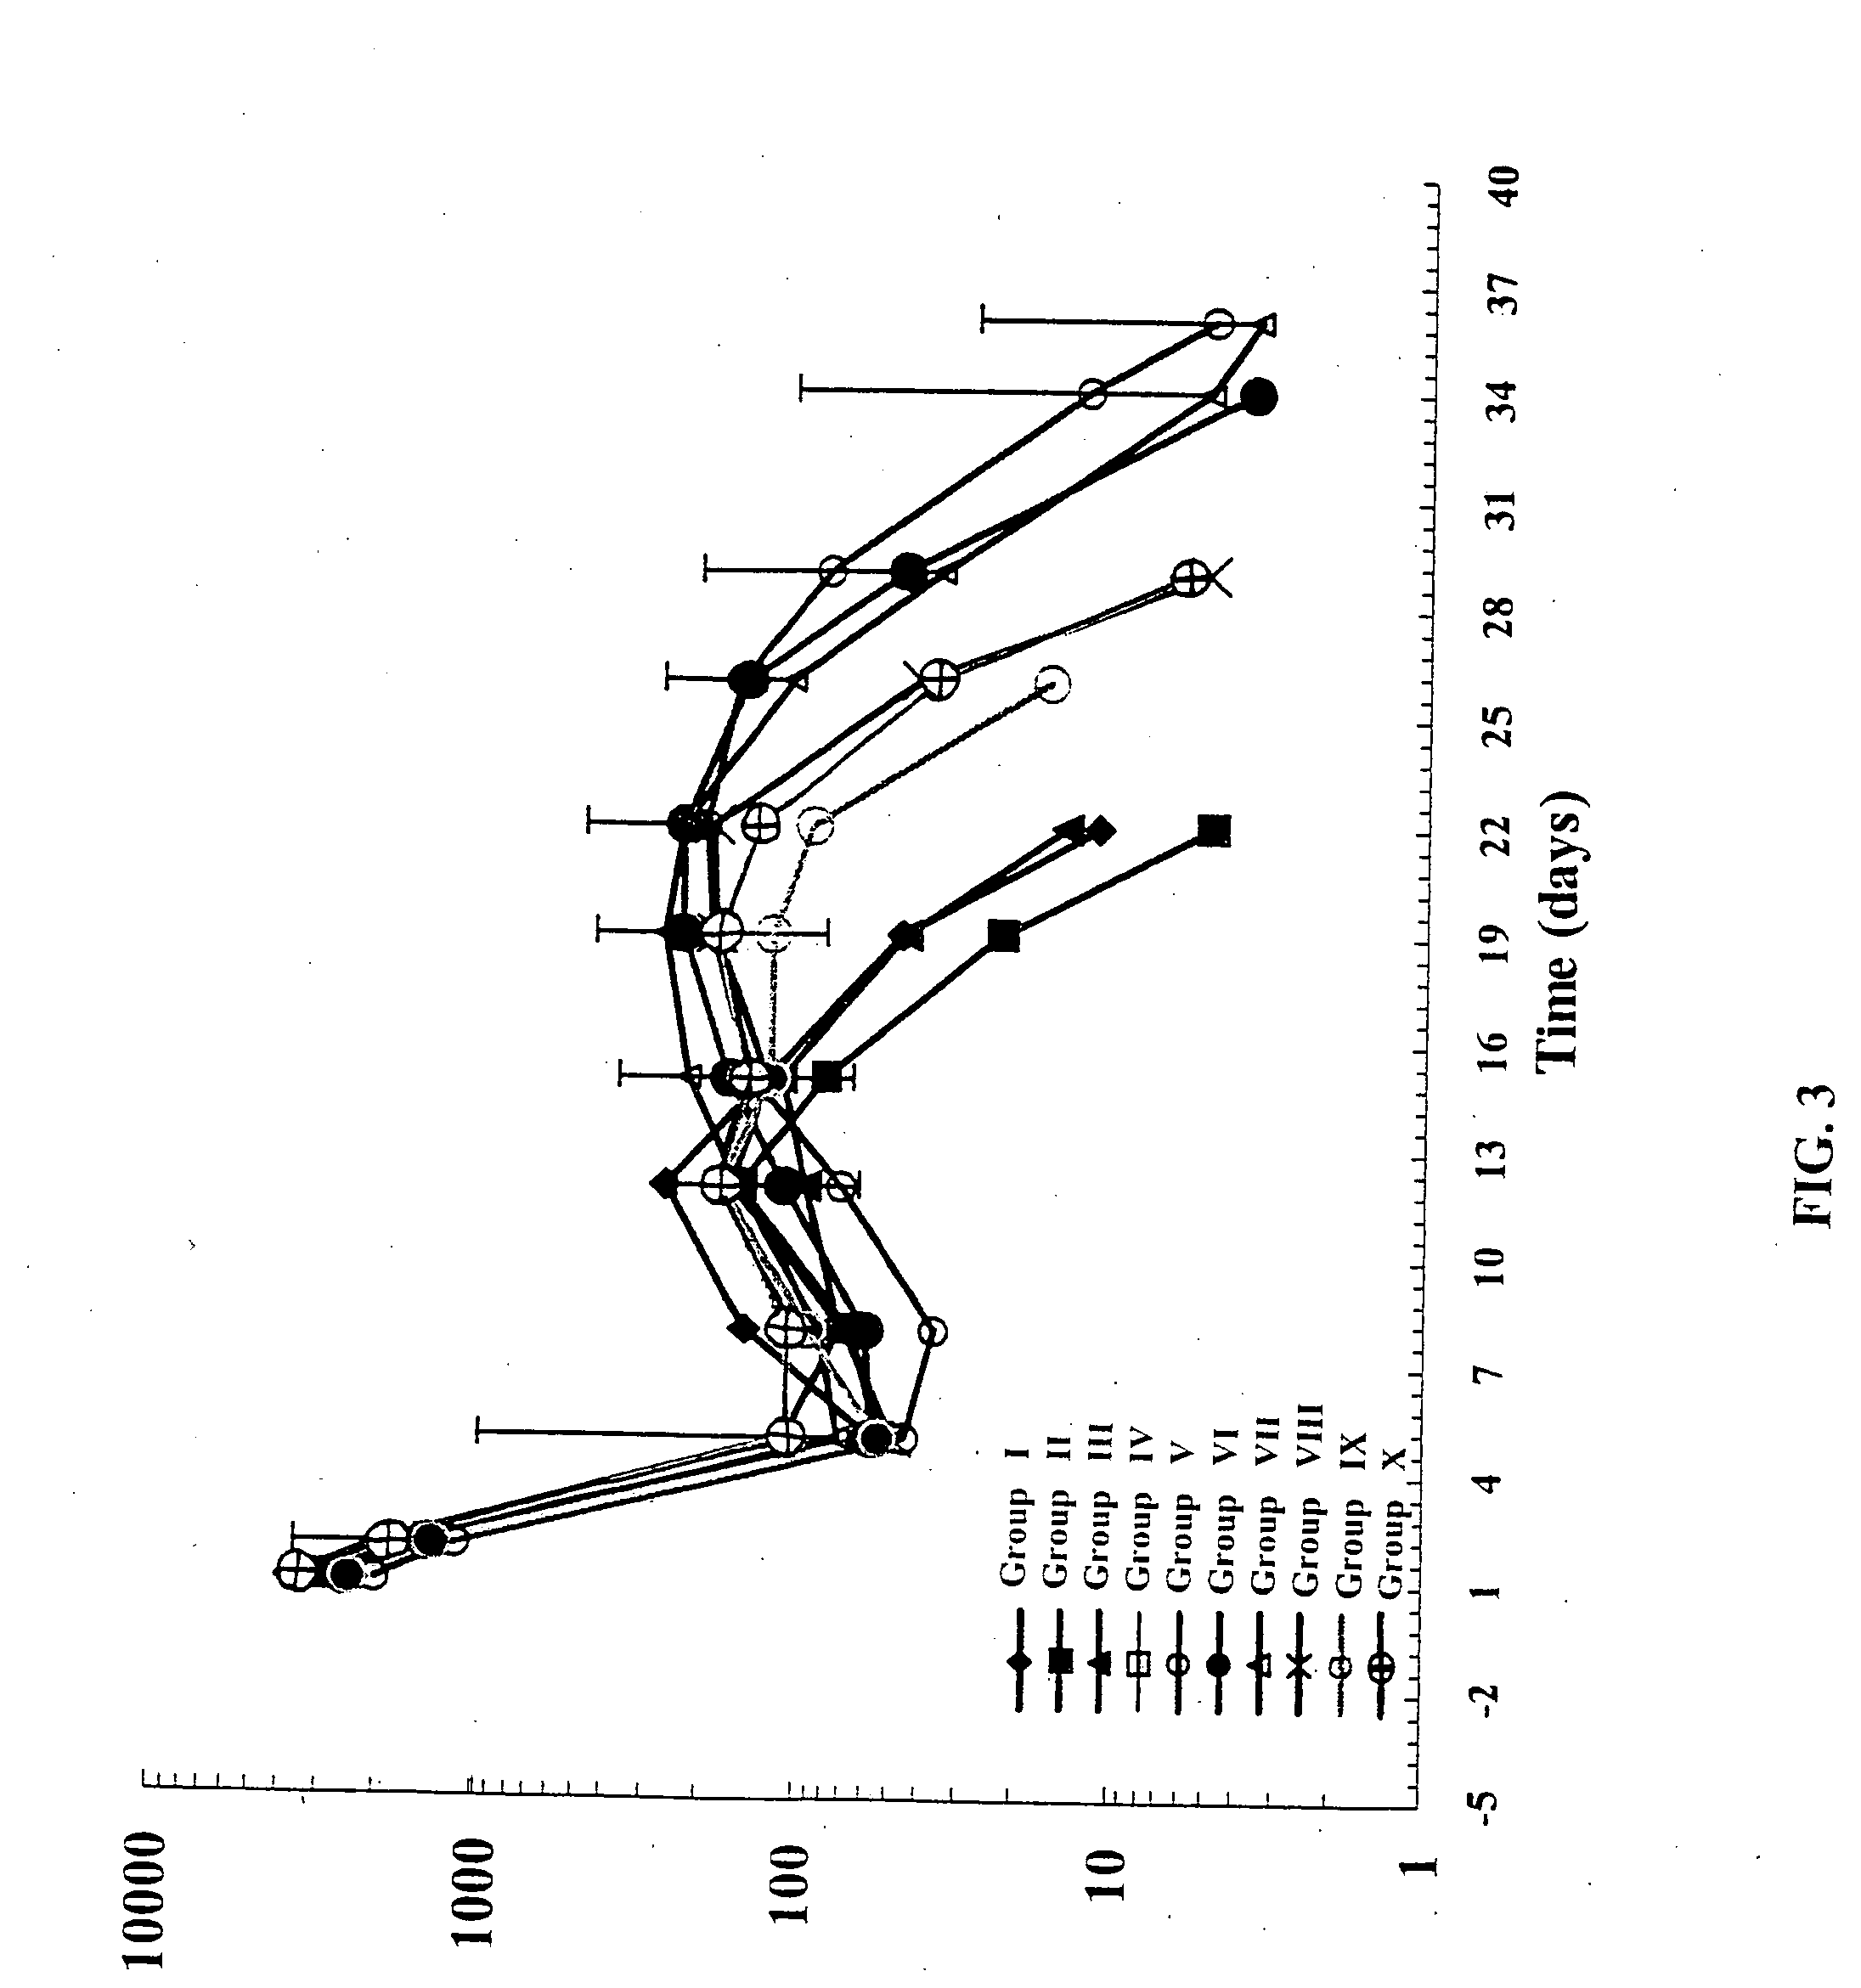 Method of modifying the release profile of sustained release compositions